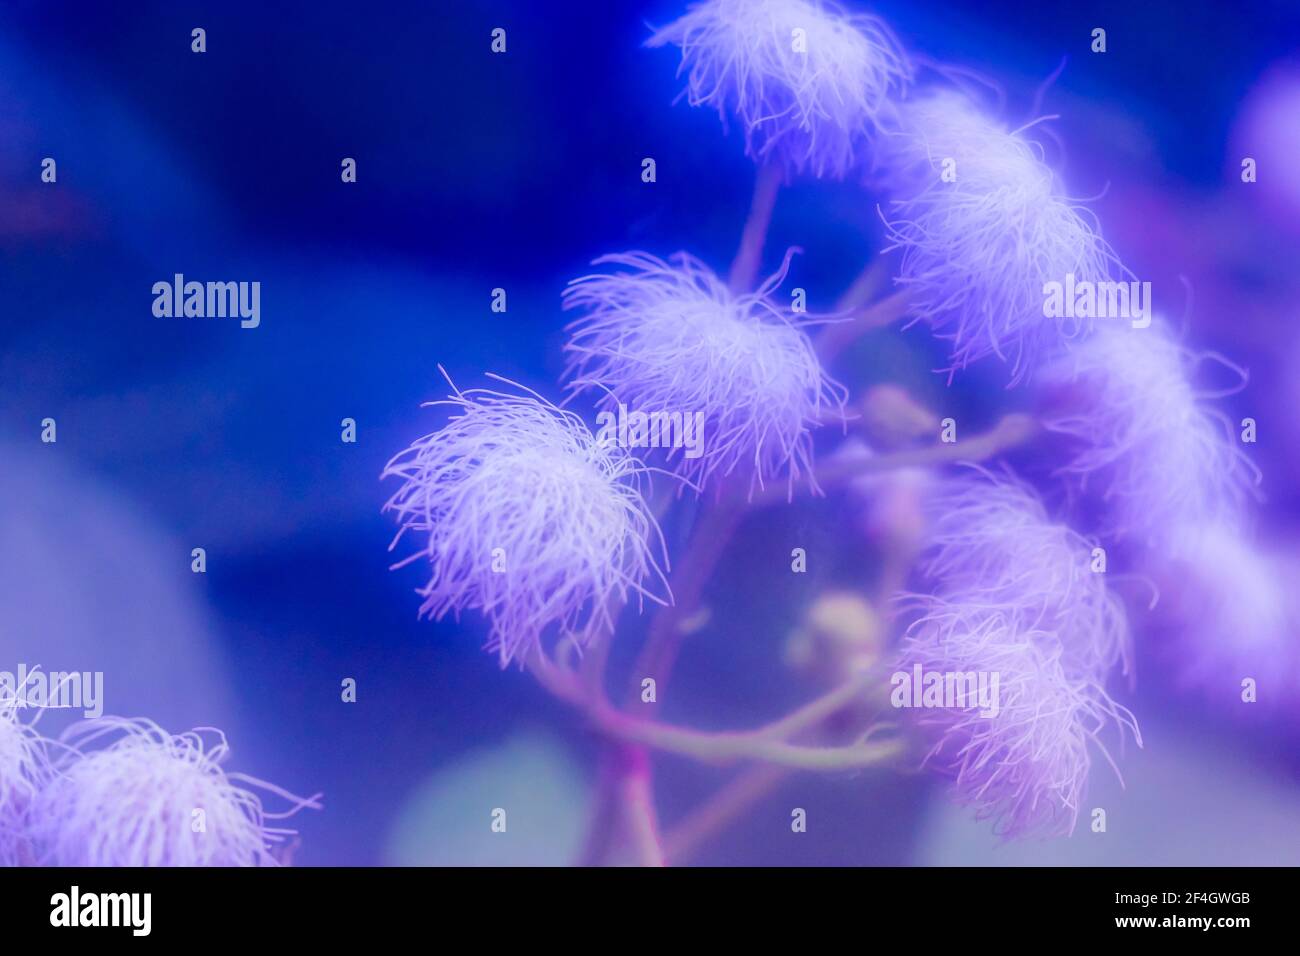 Small fluffy purple flowers on a long stem close-up. An unusual flower with blue toning. Beautiful flowers made with color filters. Floral abstract bl Stock Photo